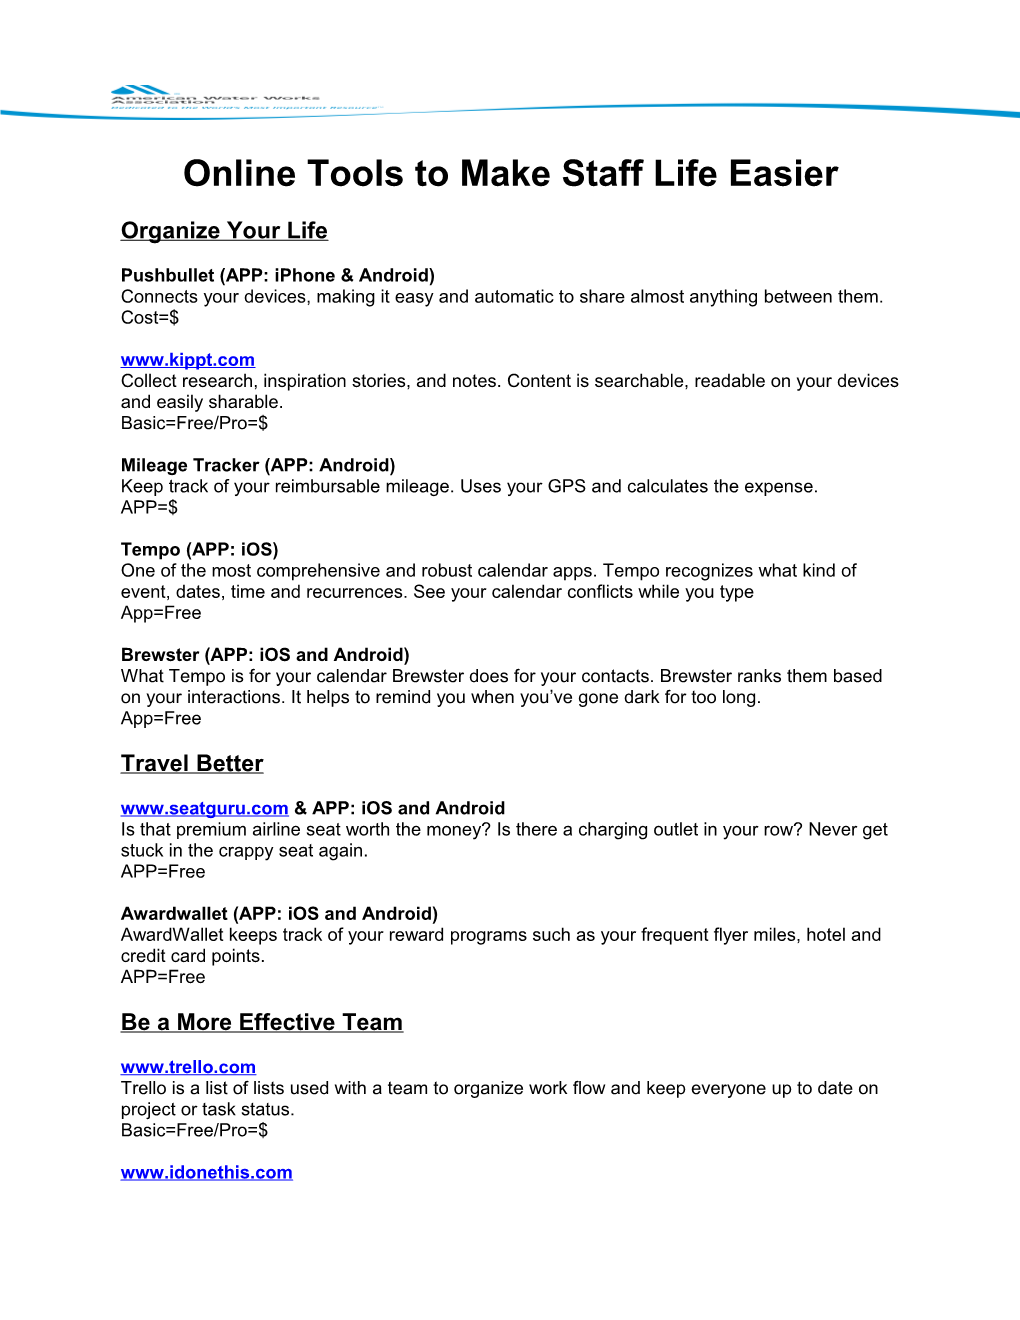 Online Tools to Make Staff Life Easier